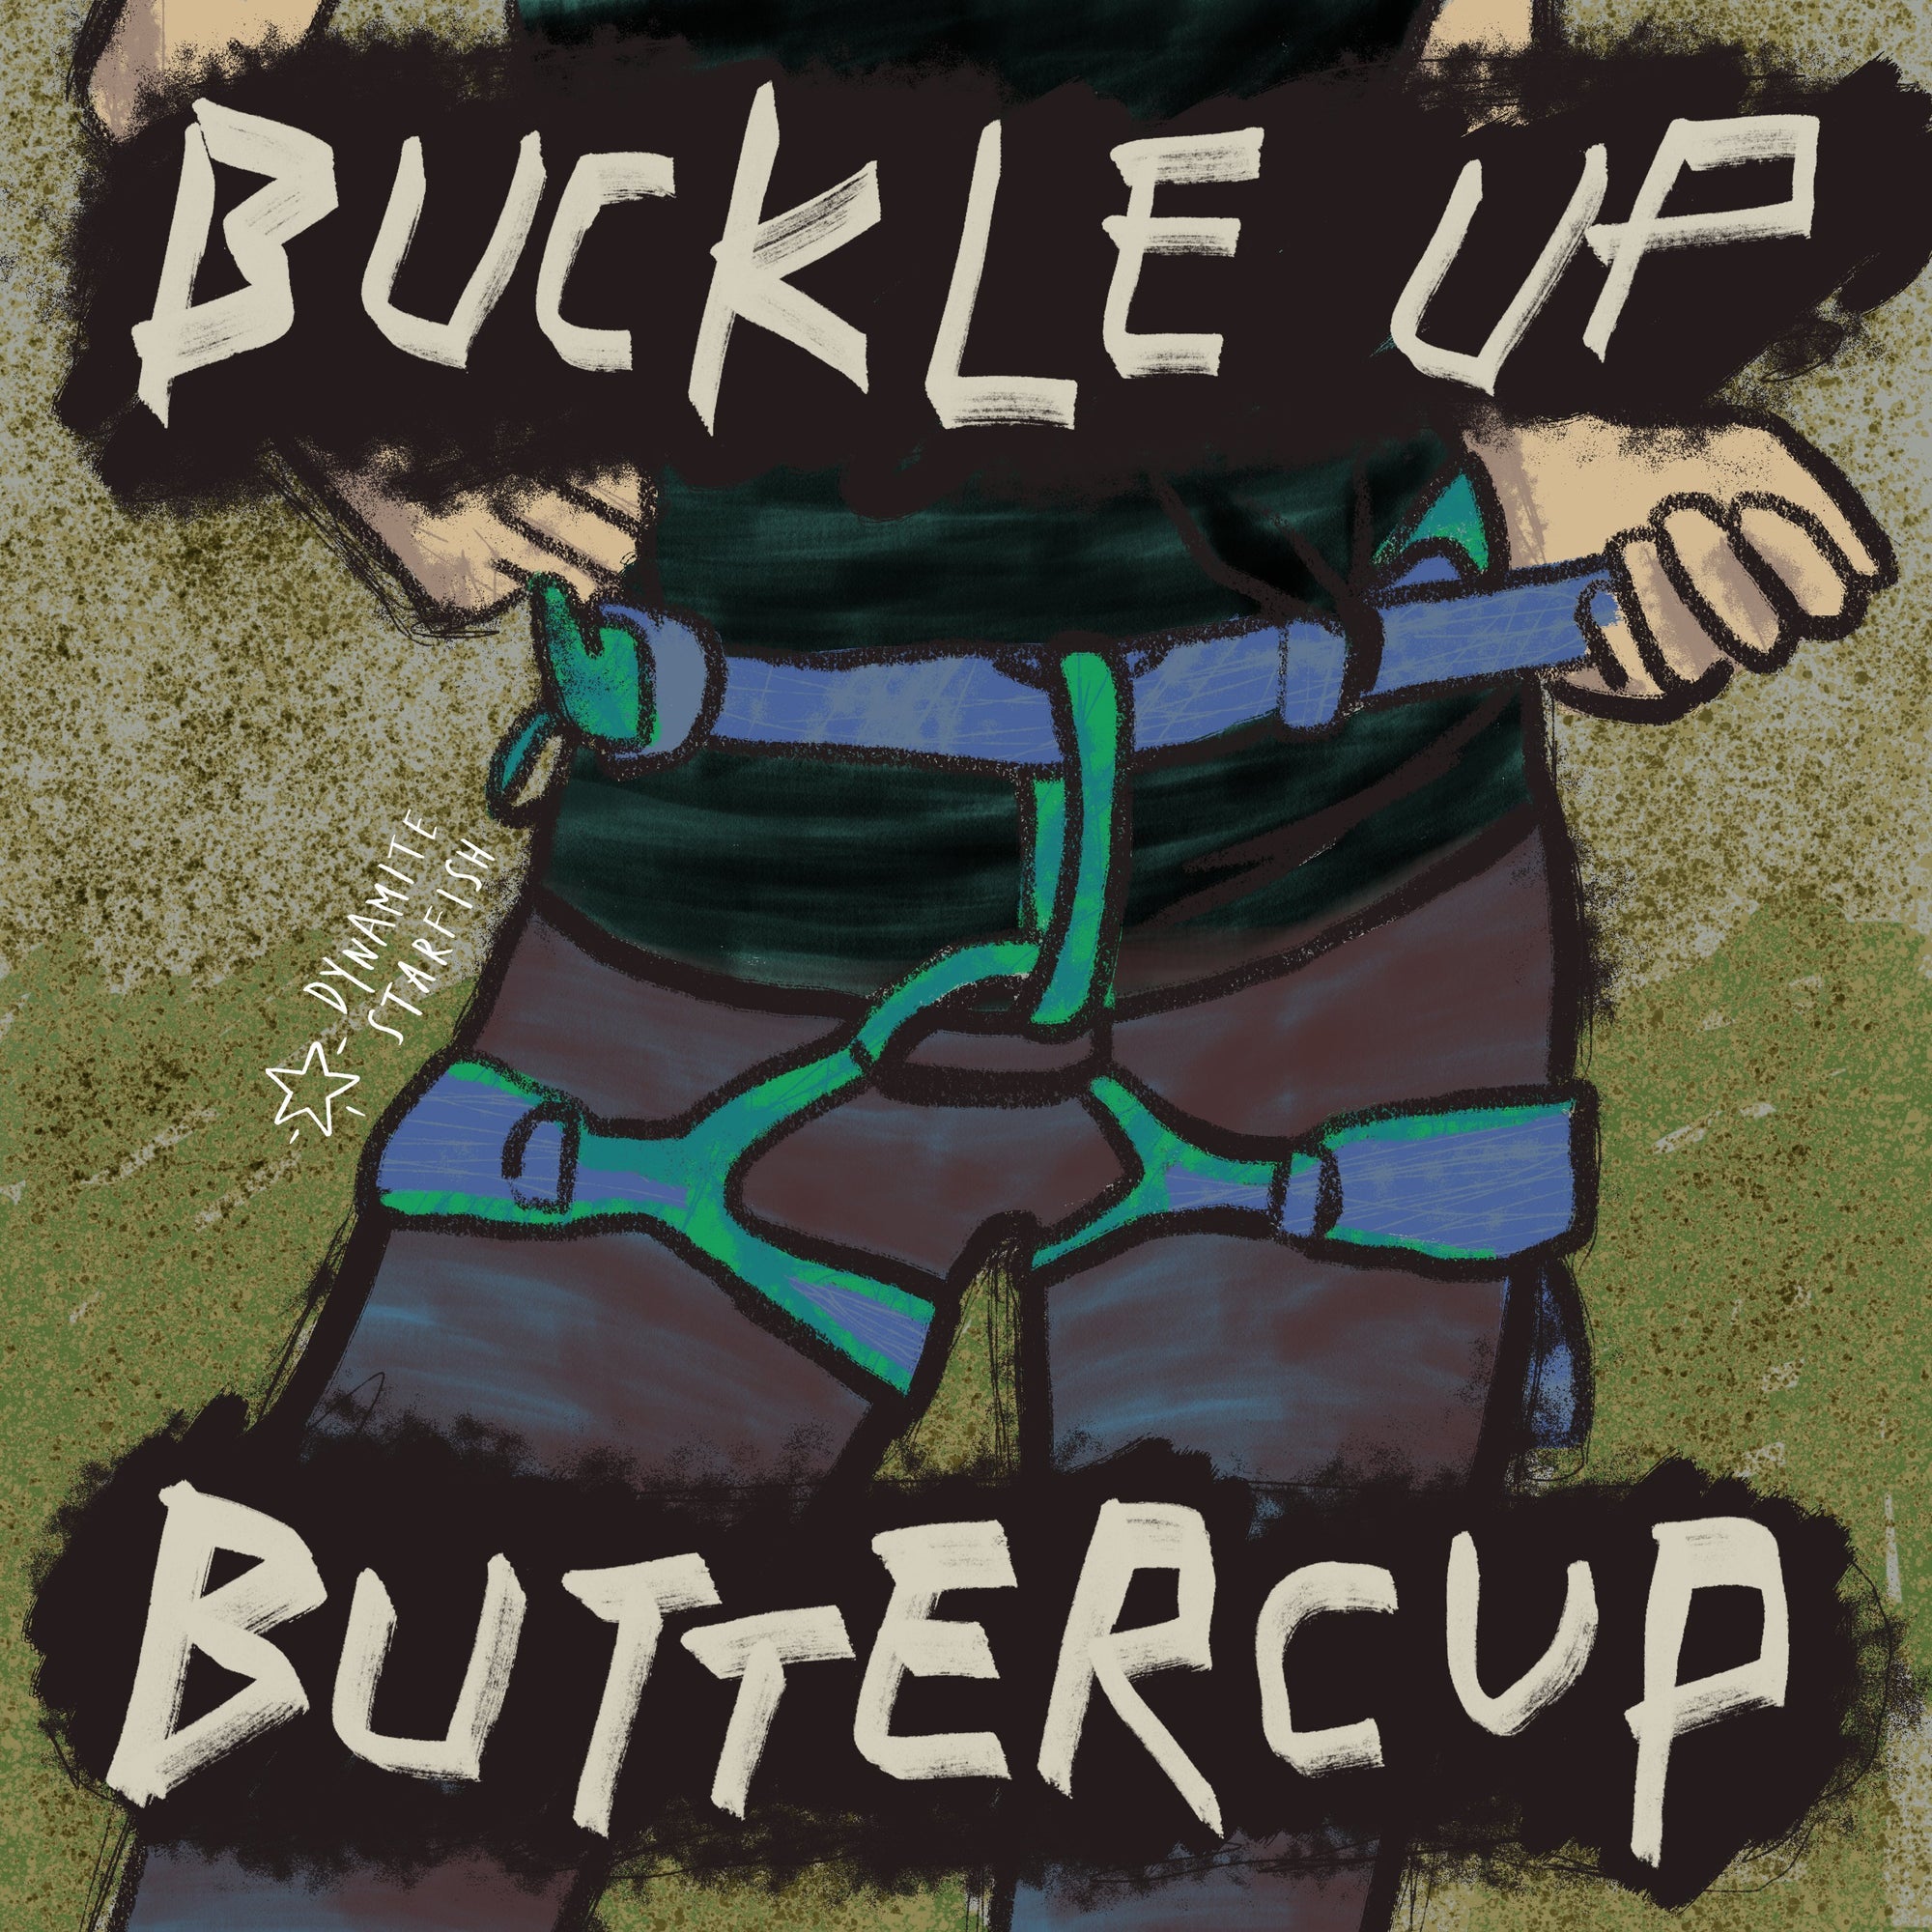 100 Drawings about Climbing — Buckle Up Buttercup | Dynamite Starfish